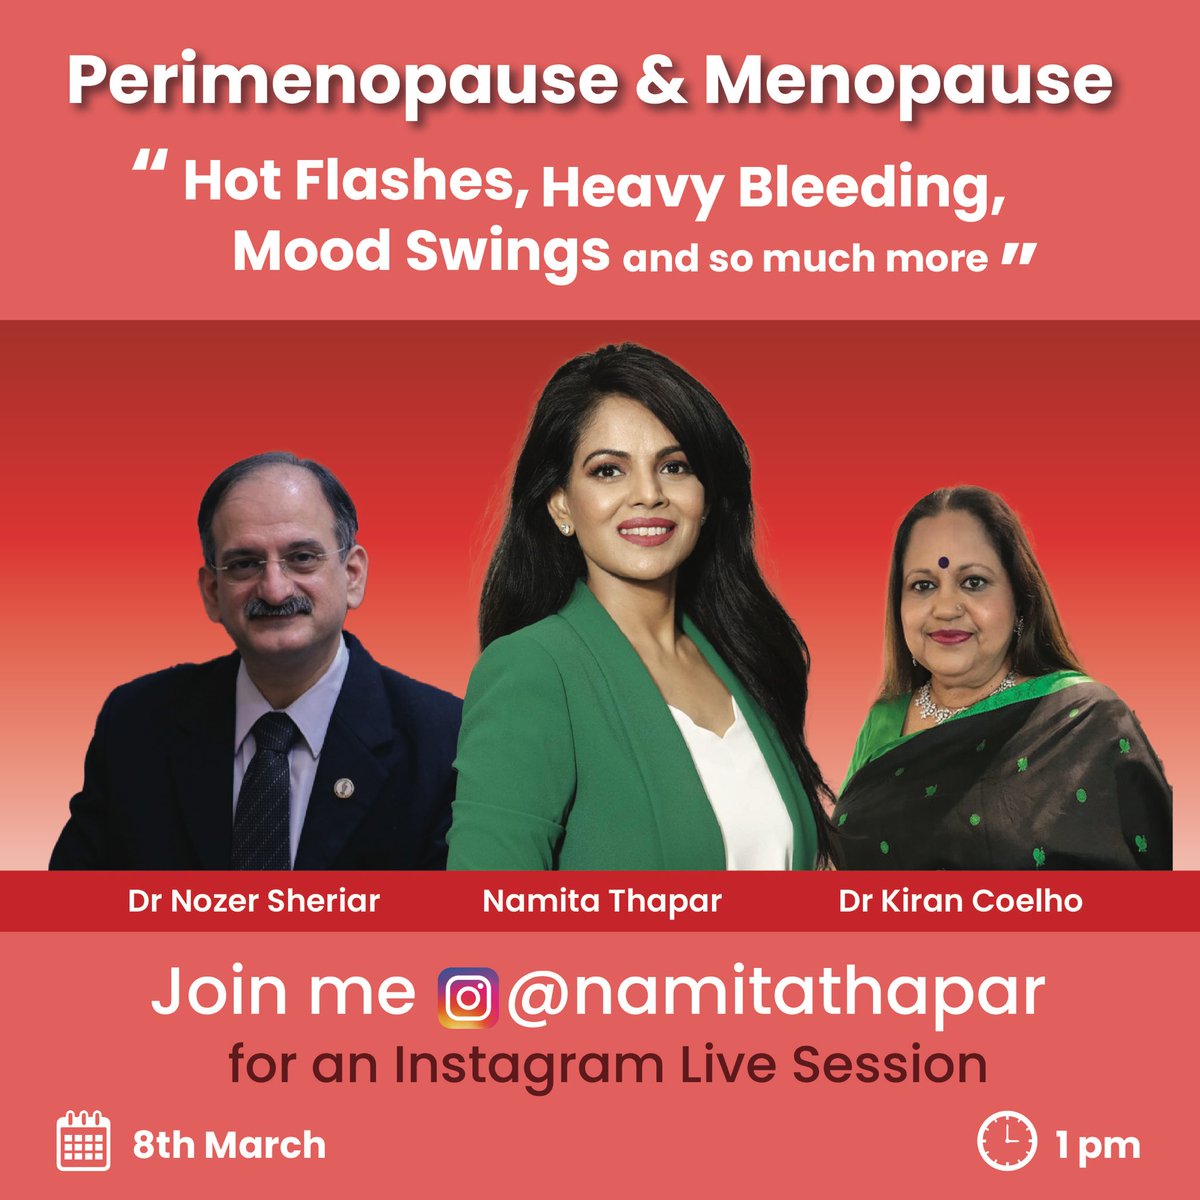 What better way to celebrate women’s day than to get educated on your health. Dr Nozer & Dr Kiran are two of the topmost gynaecologists of our country & have done extensive work on menopause. Please do attend this half hour insta live tomorrow to learn from experts !